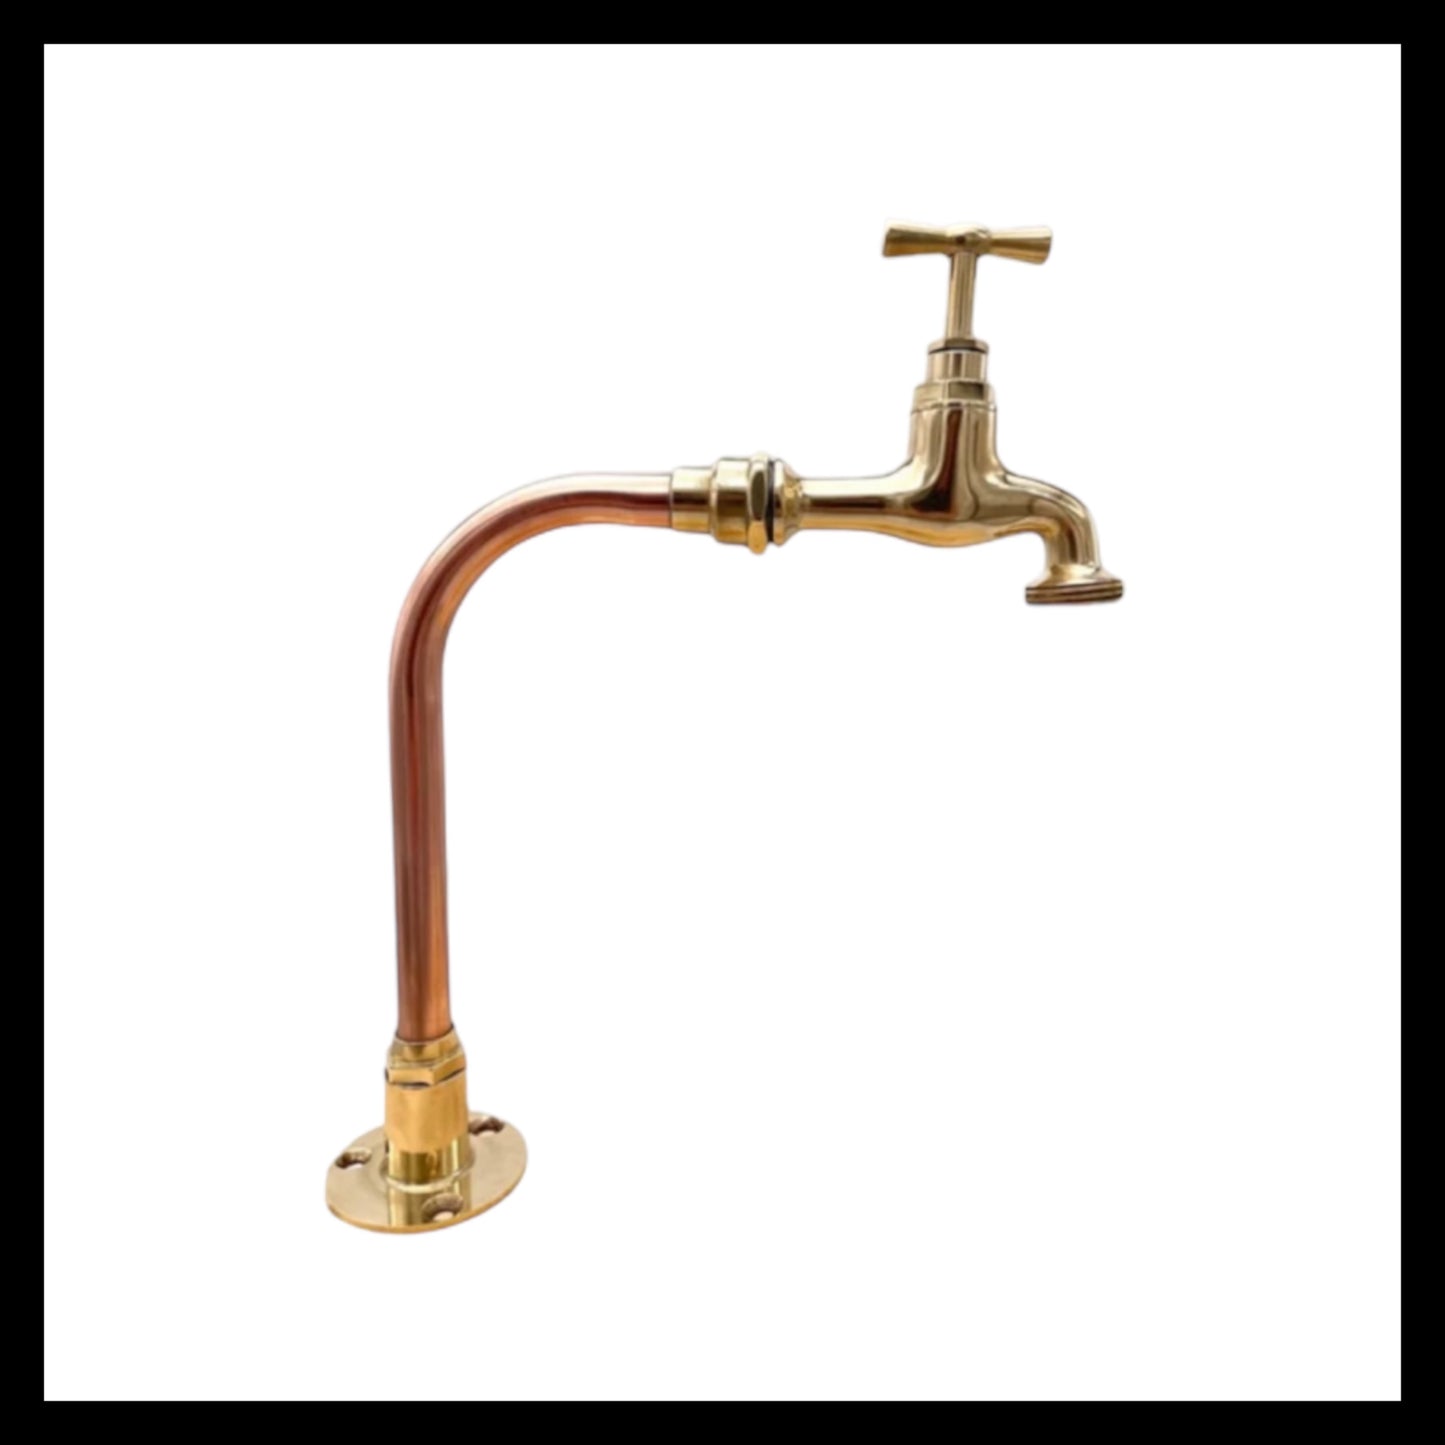 Copper and brass handmade tap faucet sold by All Things French Store